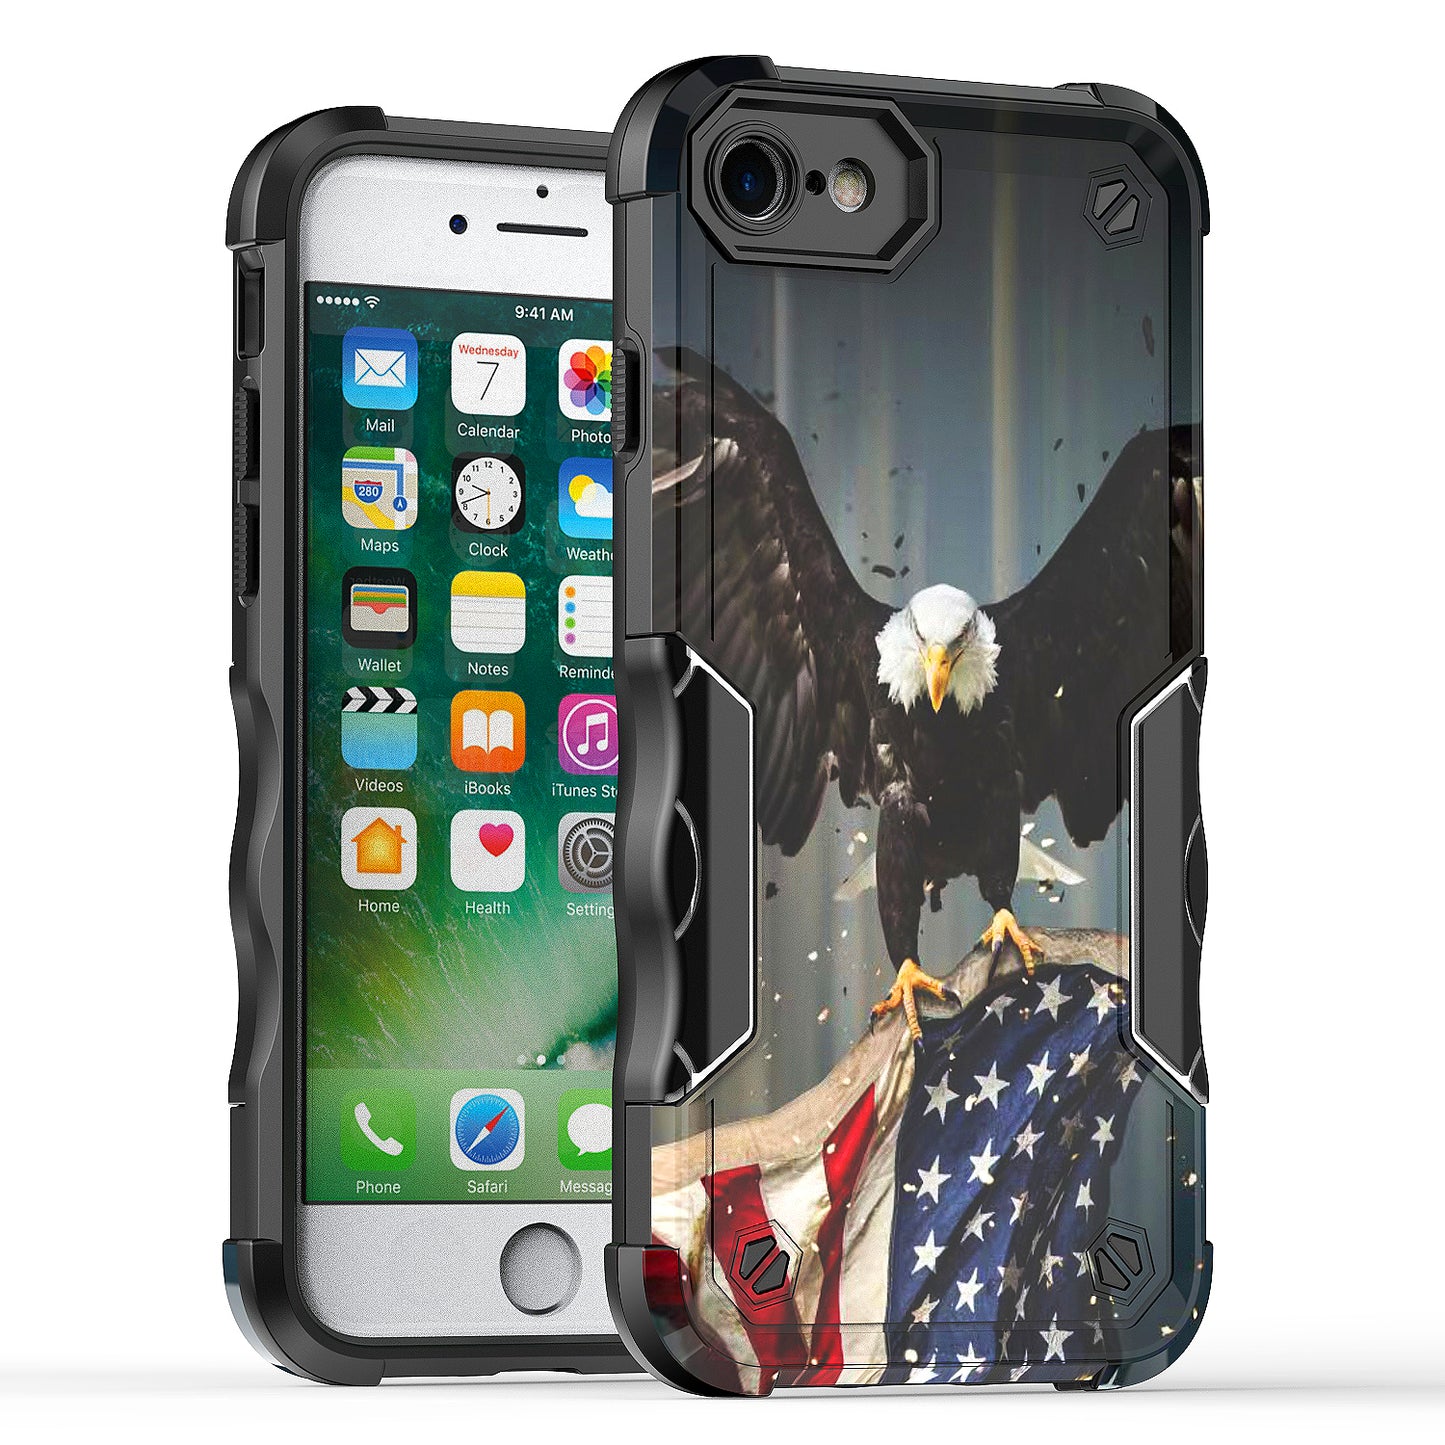 Case For Apple iPhone 6 - Hybrid Grip Design Shockproof Phone Cover - American Bald Eagle Flying with Flag